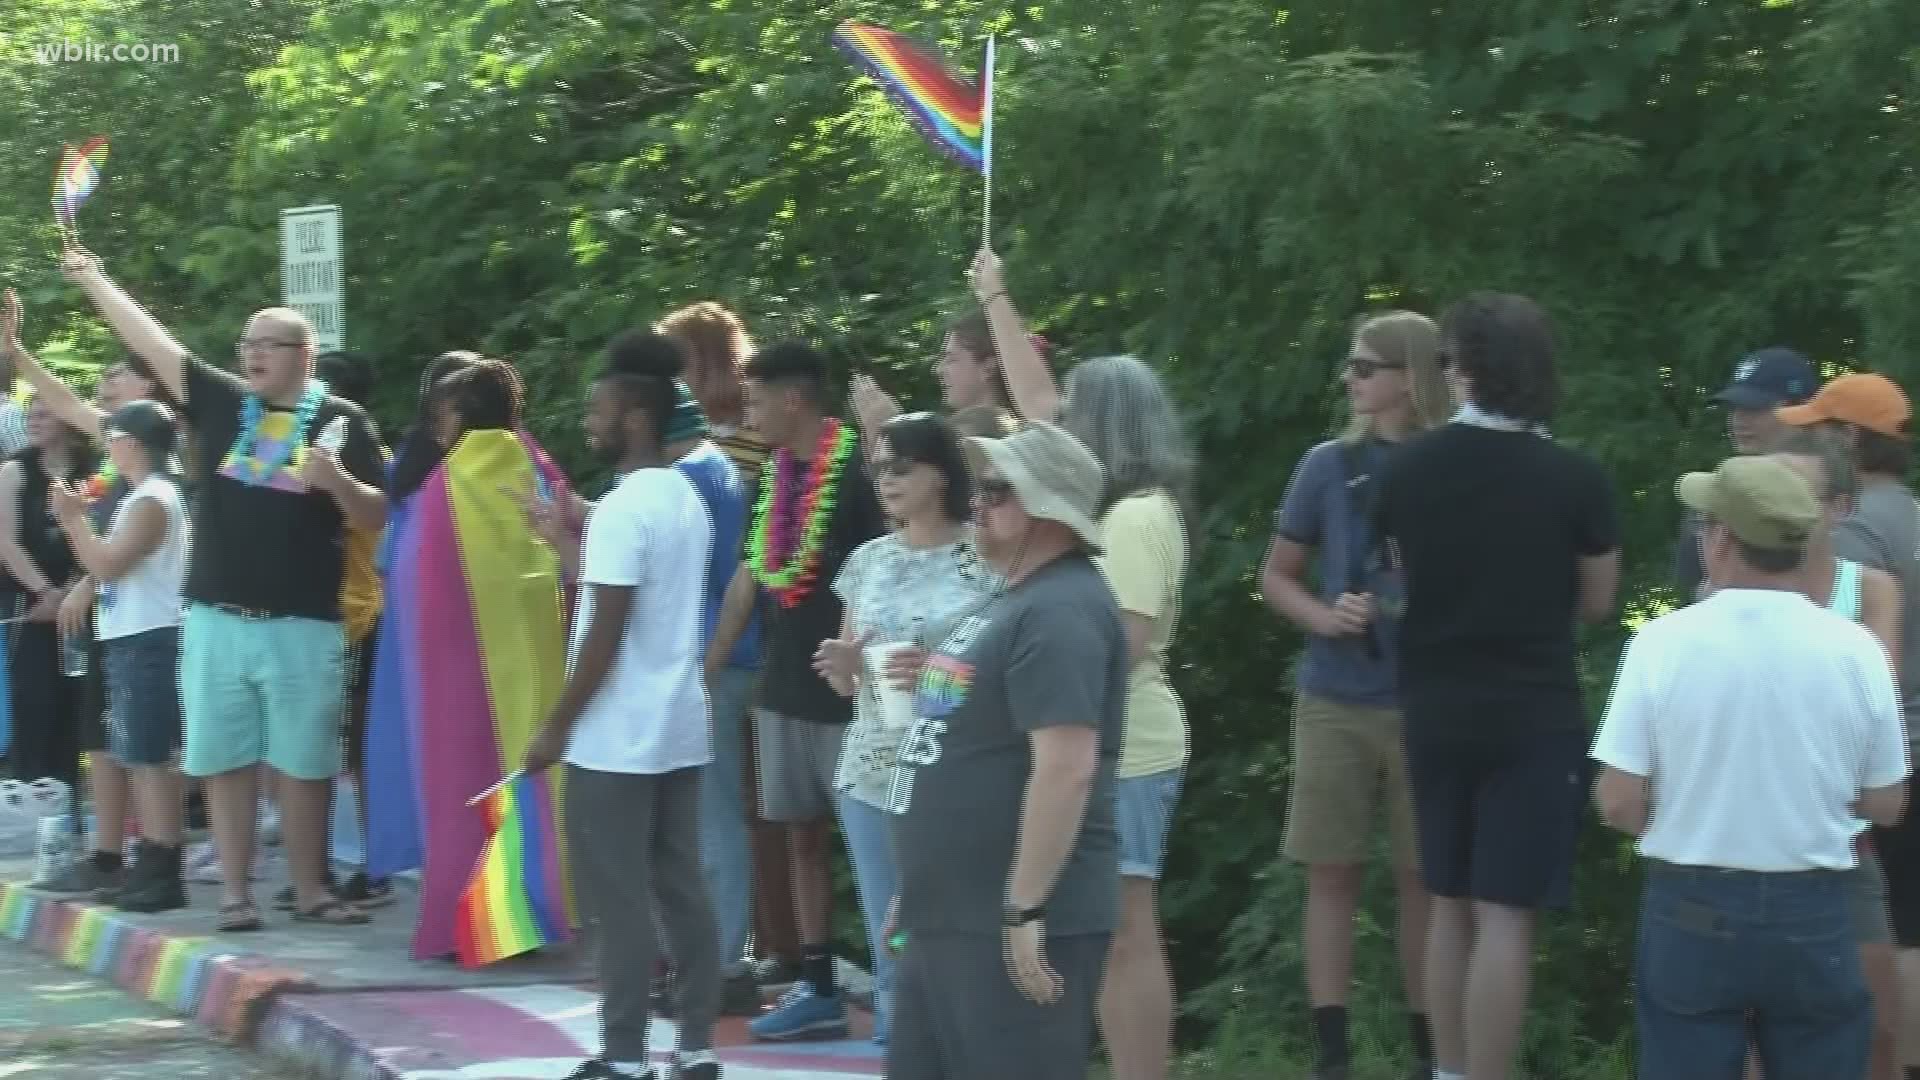 People from across East Tennessee gathered for a community Pride rally in Alcoa after homophobic slurs were painted over Pride art on a well-known bridge.